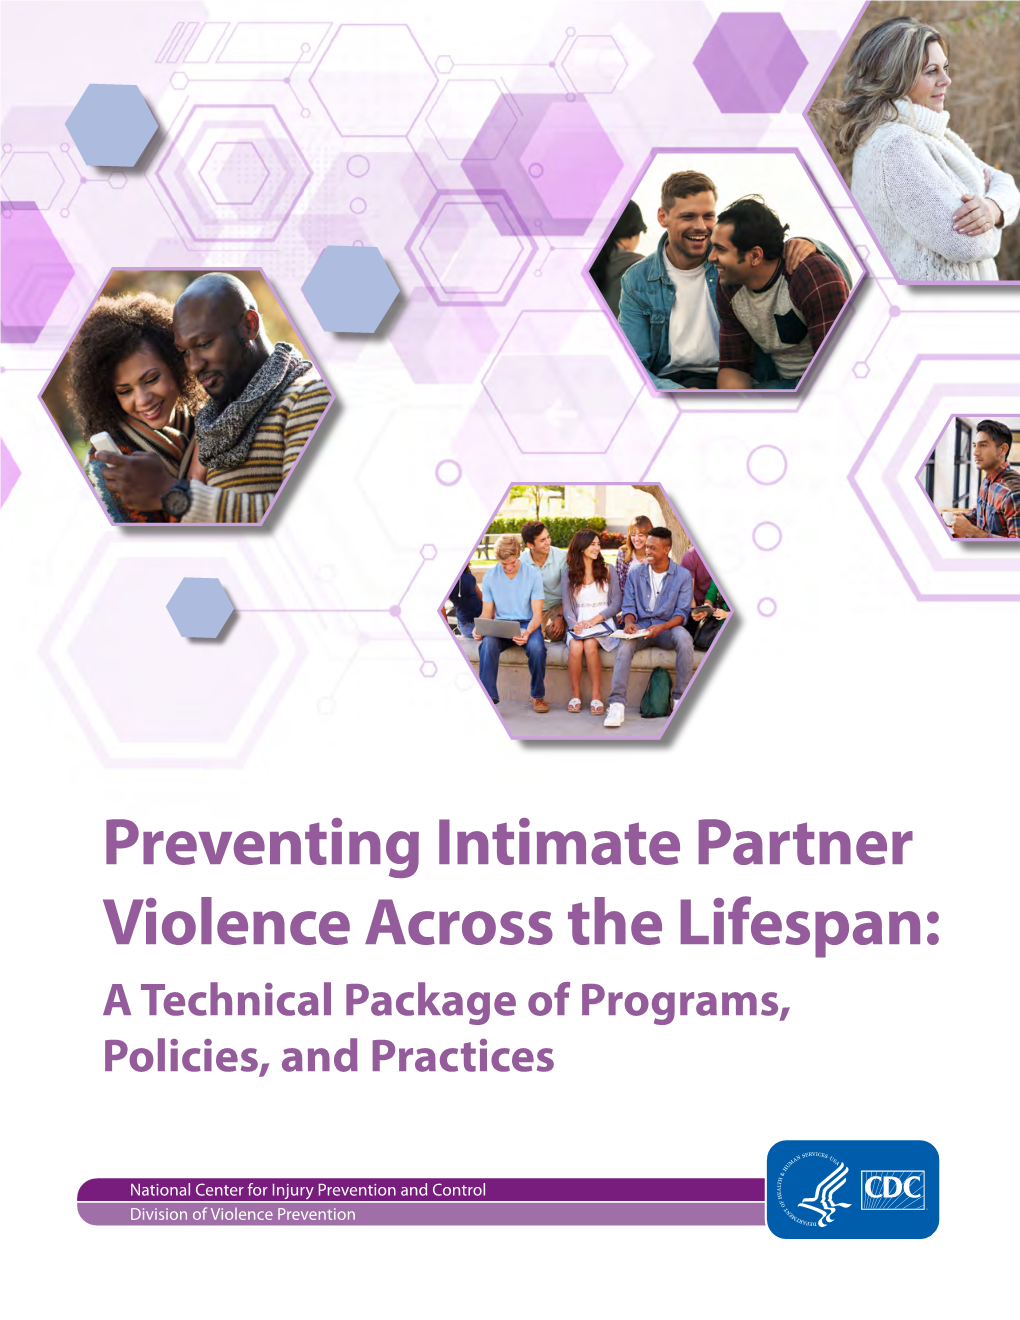 Preventing Intimate Partner Violence Across the Lifespan: a Technical Package of Programs, Policies, and Practices